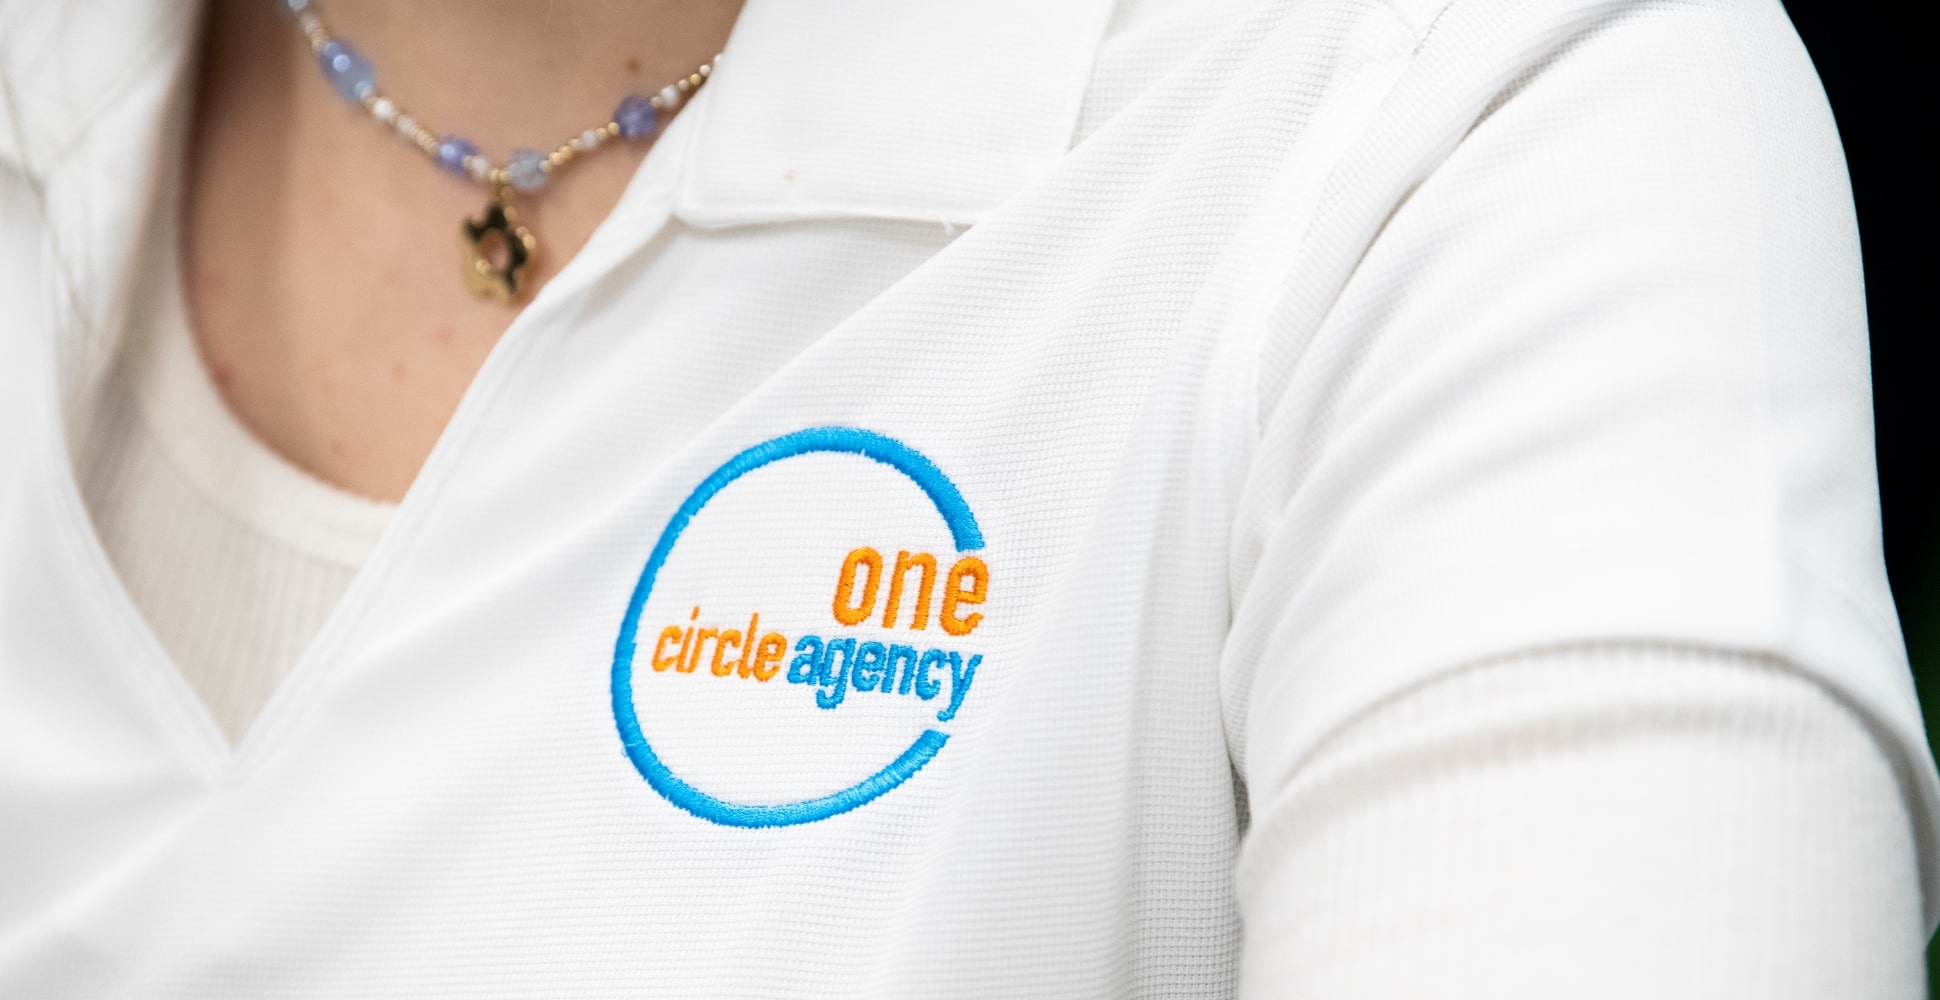 The One Circle Agency logo shown on a white shirt.